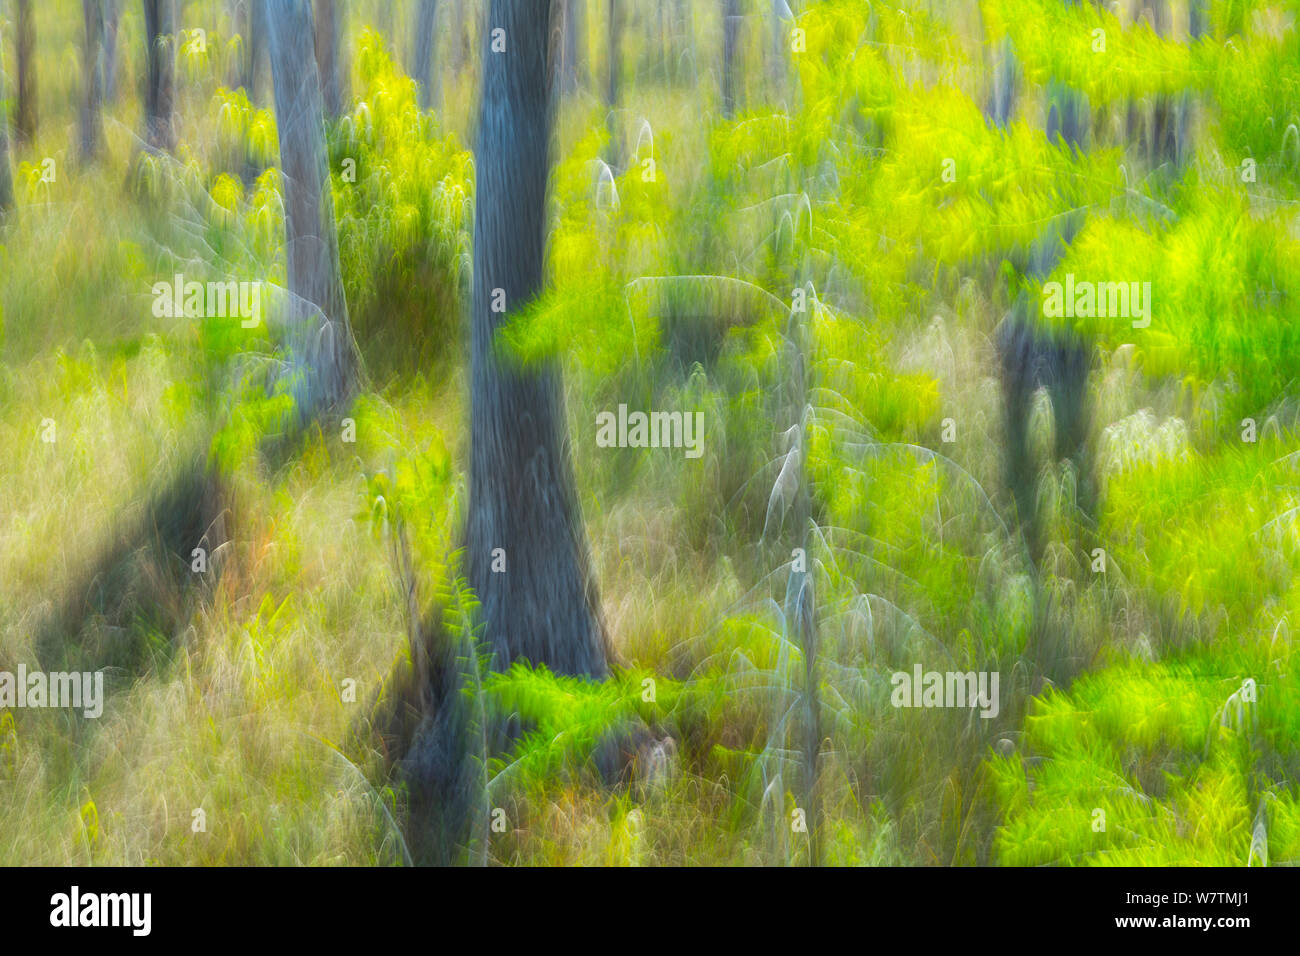 Abstract photograph of Cypresss trees (Cupressaceae) Big Cypress National Preserve, Florida, USA, March 2013. Stock Photo